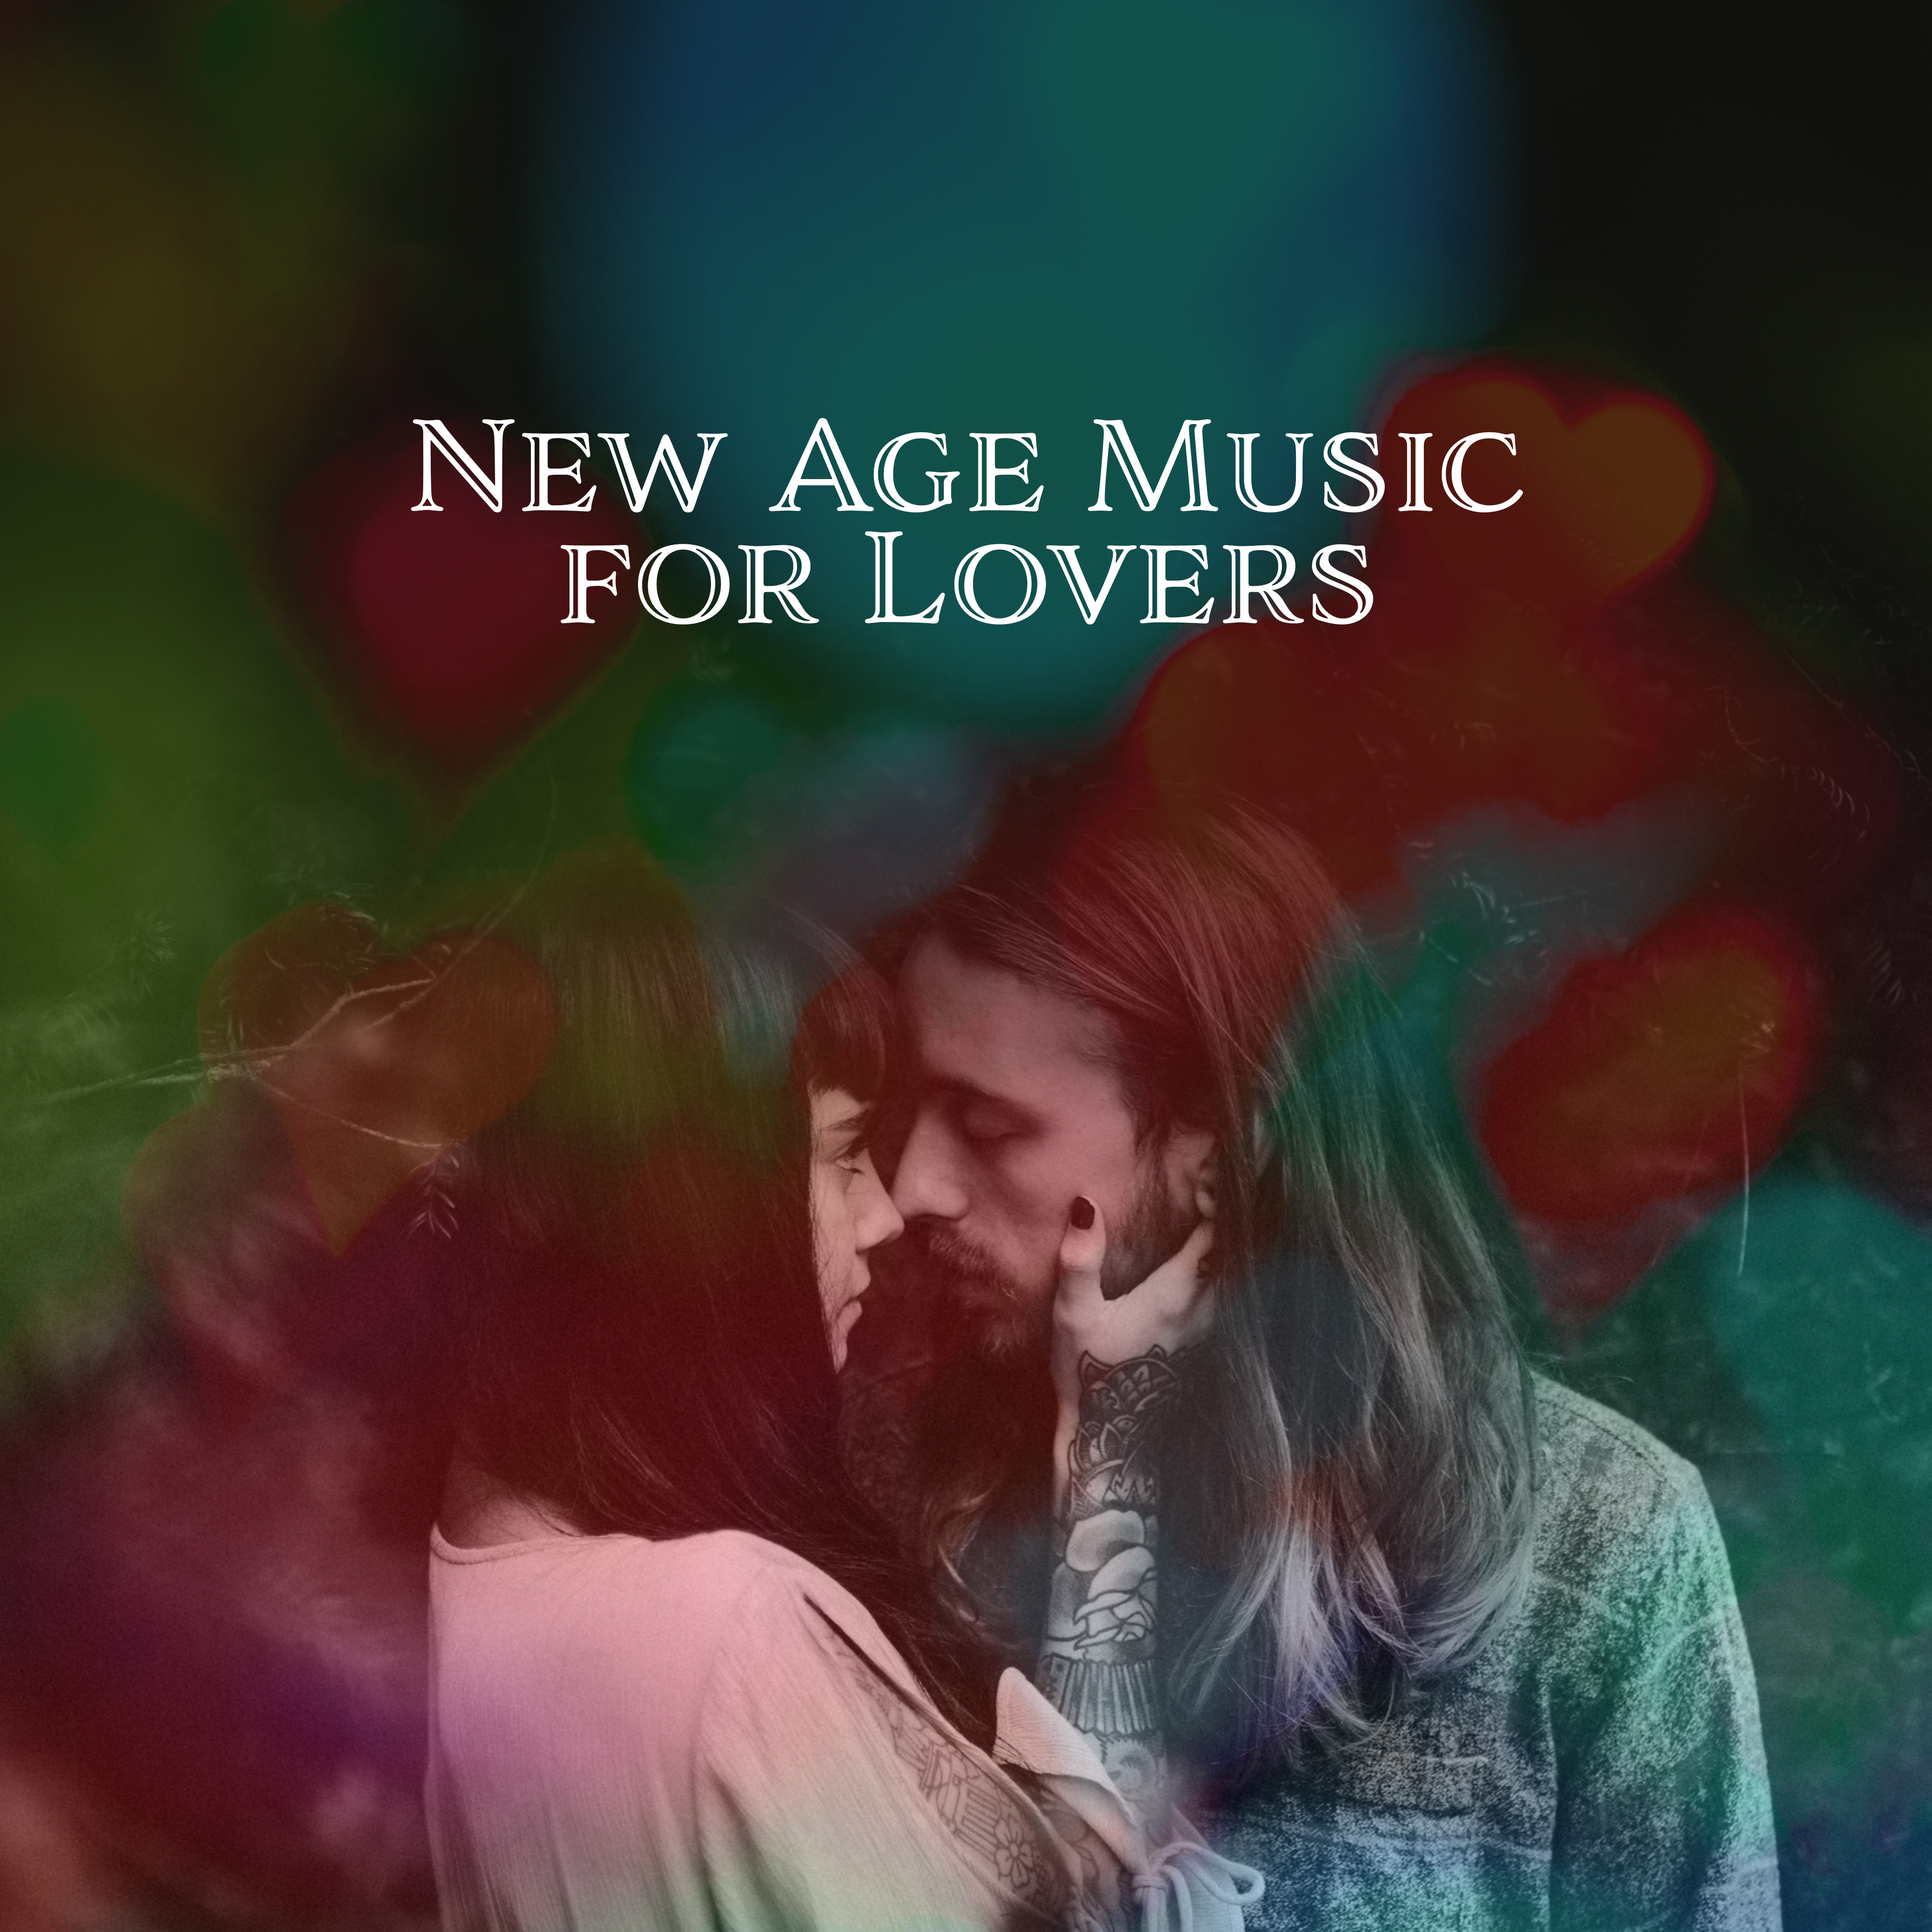 New Age Music for Lovers  Romantic Music, Sensual Dance, Deep Massage, Tantric Sex, Peaceful Music at Night